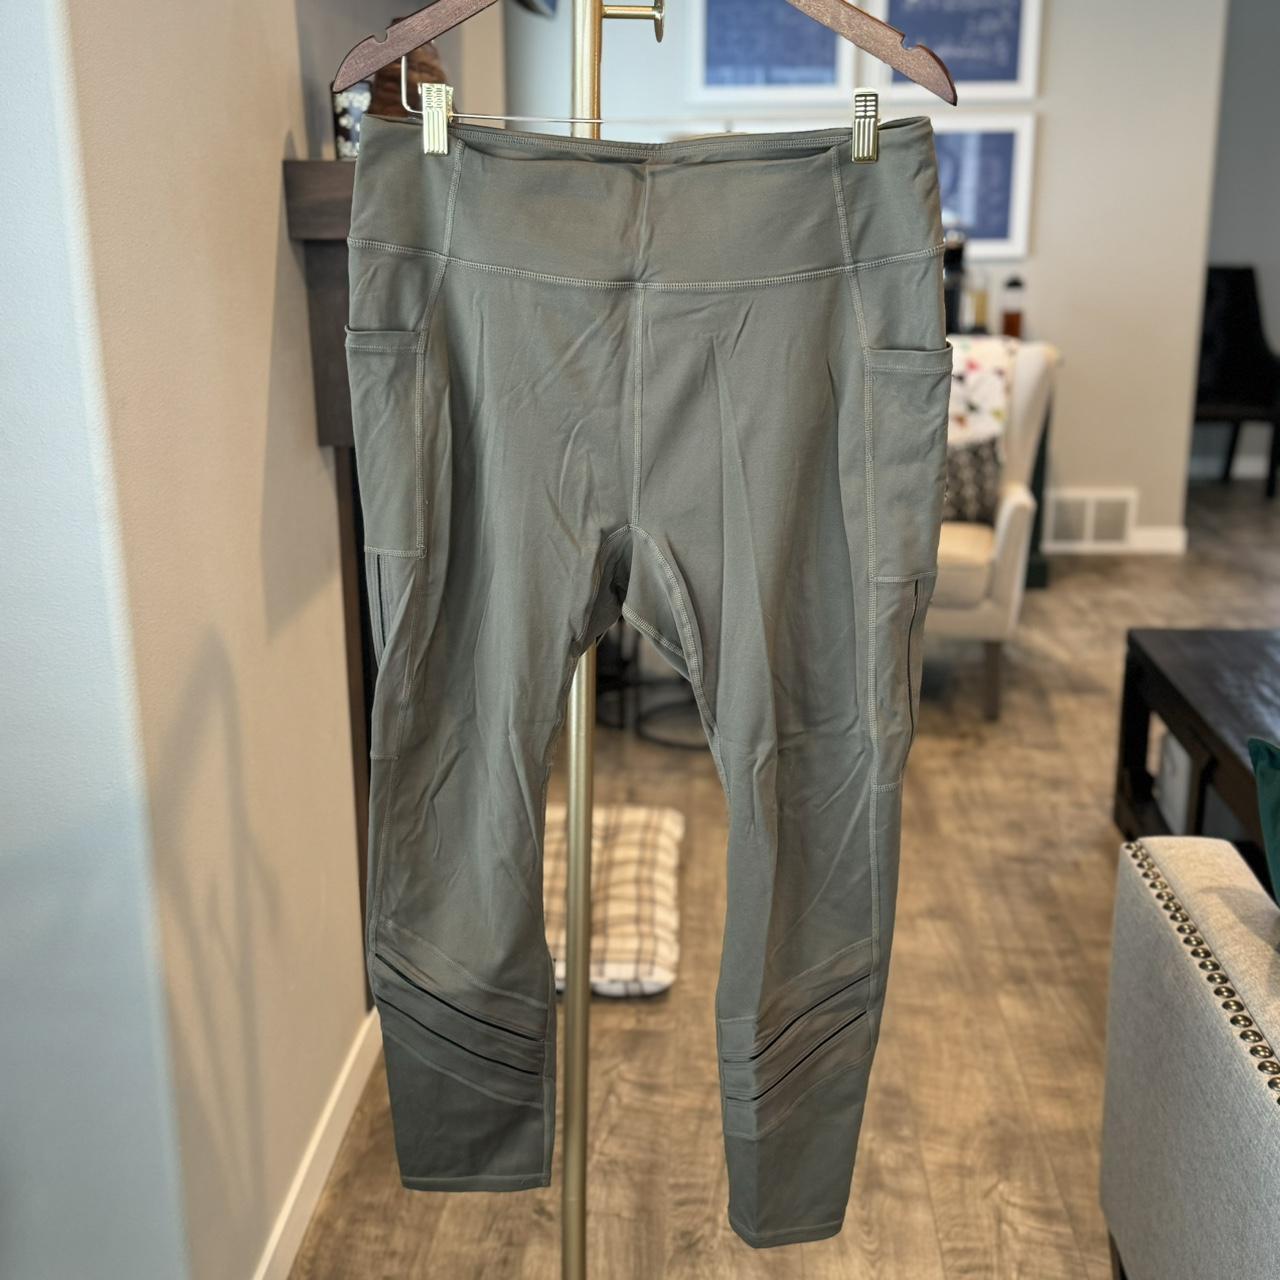 Fabletics Olive Anywhere Motion365 High-Waisted Moto - Depop